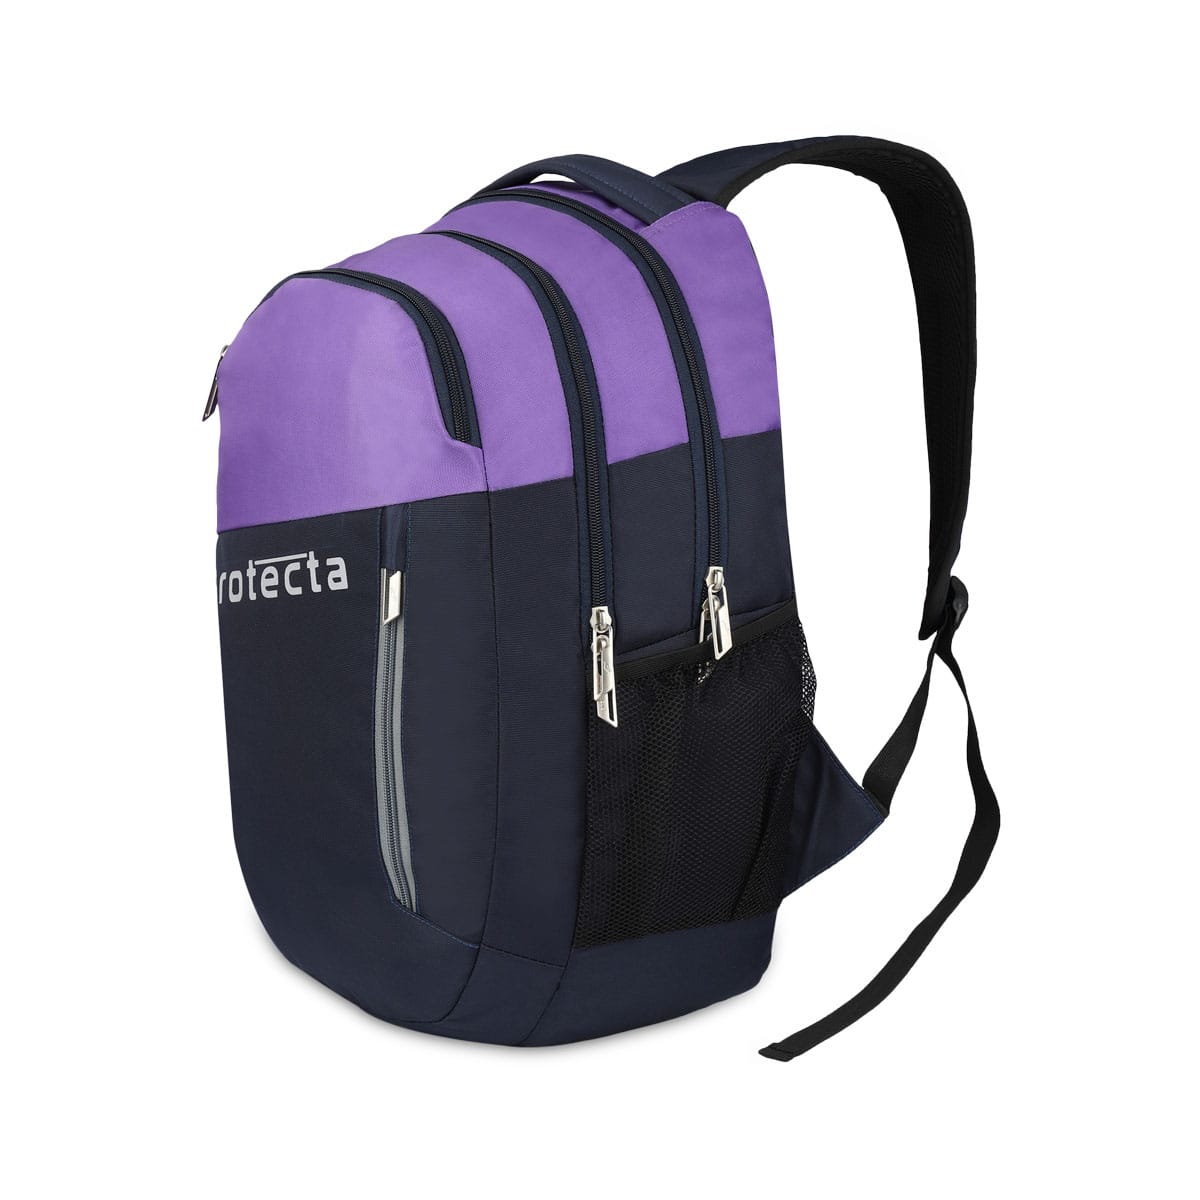 Navy-Violet| Protecta Twister Laptop Backpack-Main